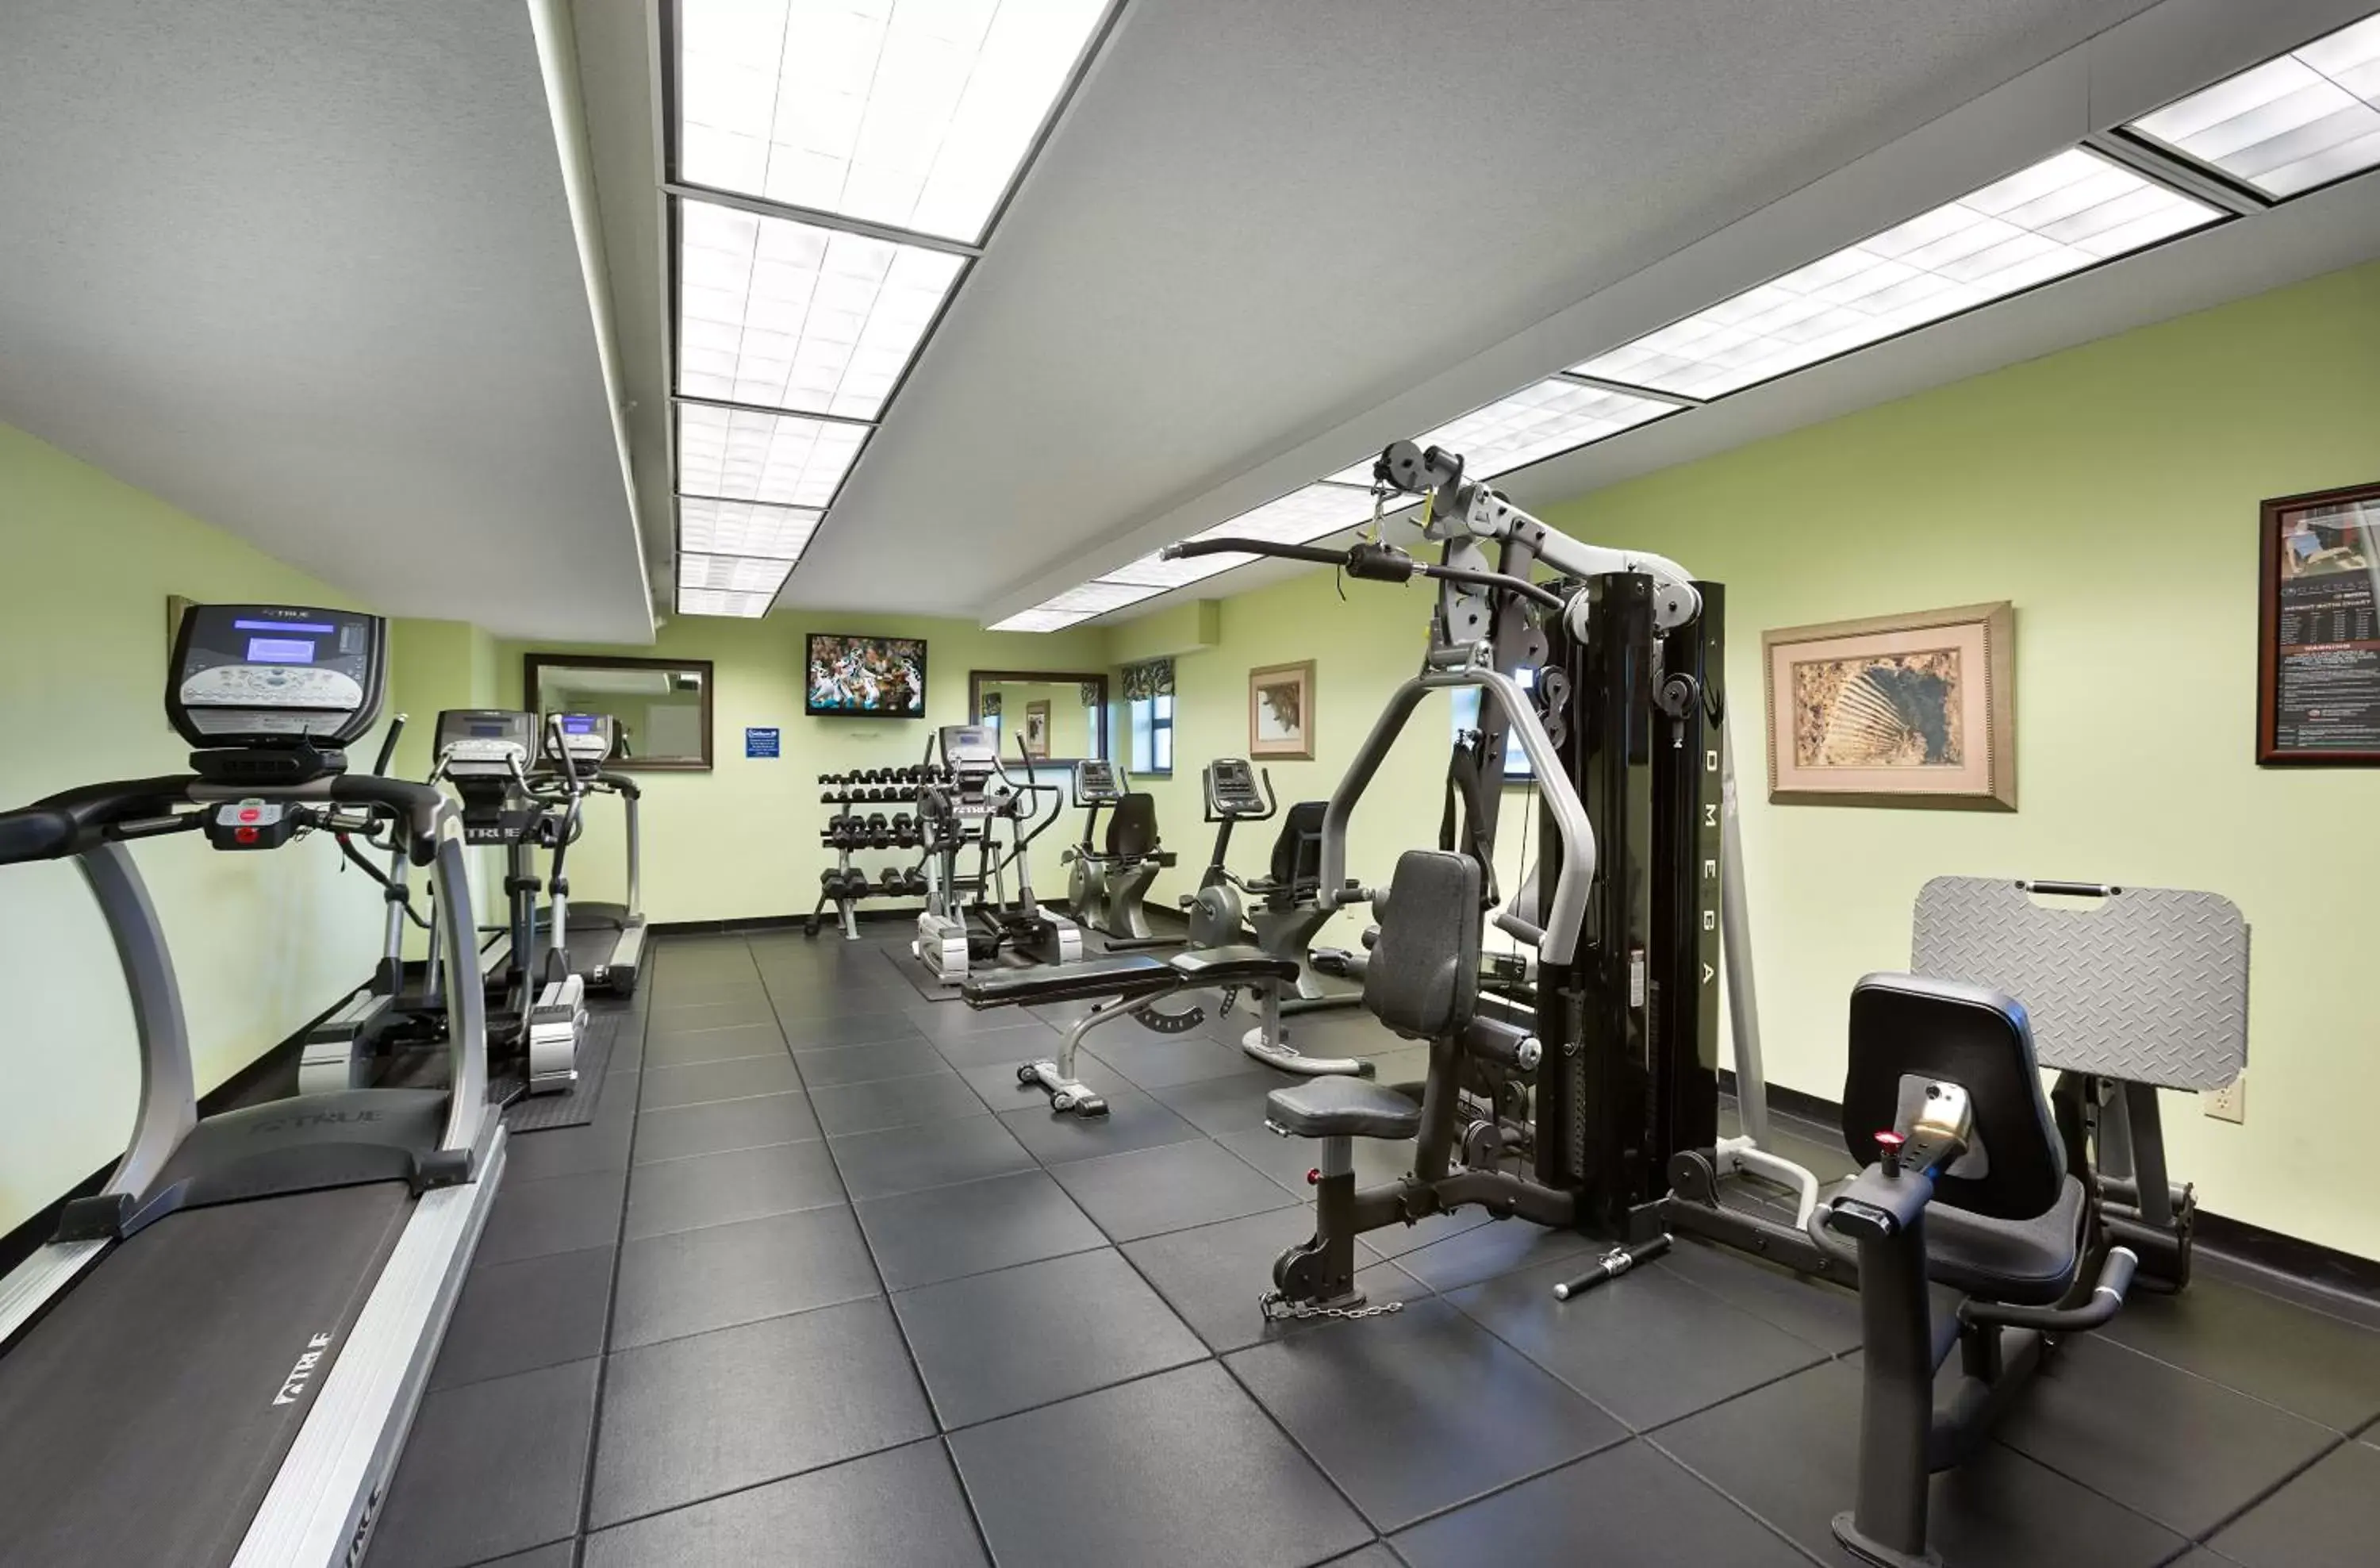 Fitness centre/facilities, Fitness Center/Facilities in Caribbean Resort Myrtle Beach